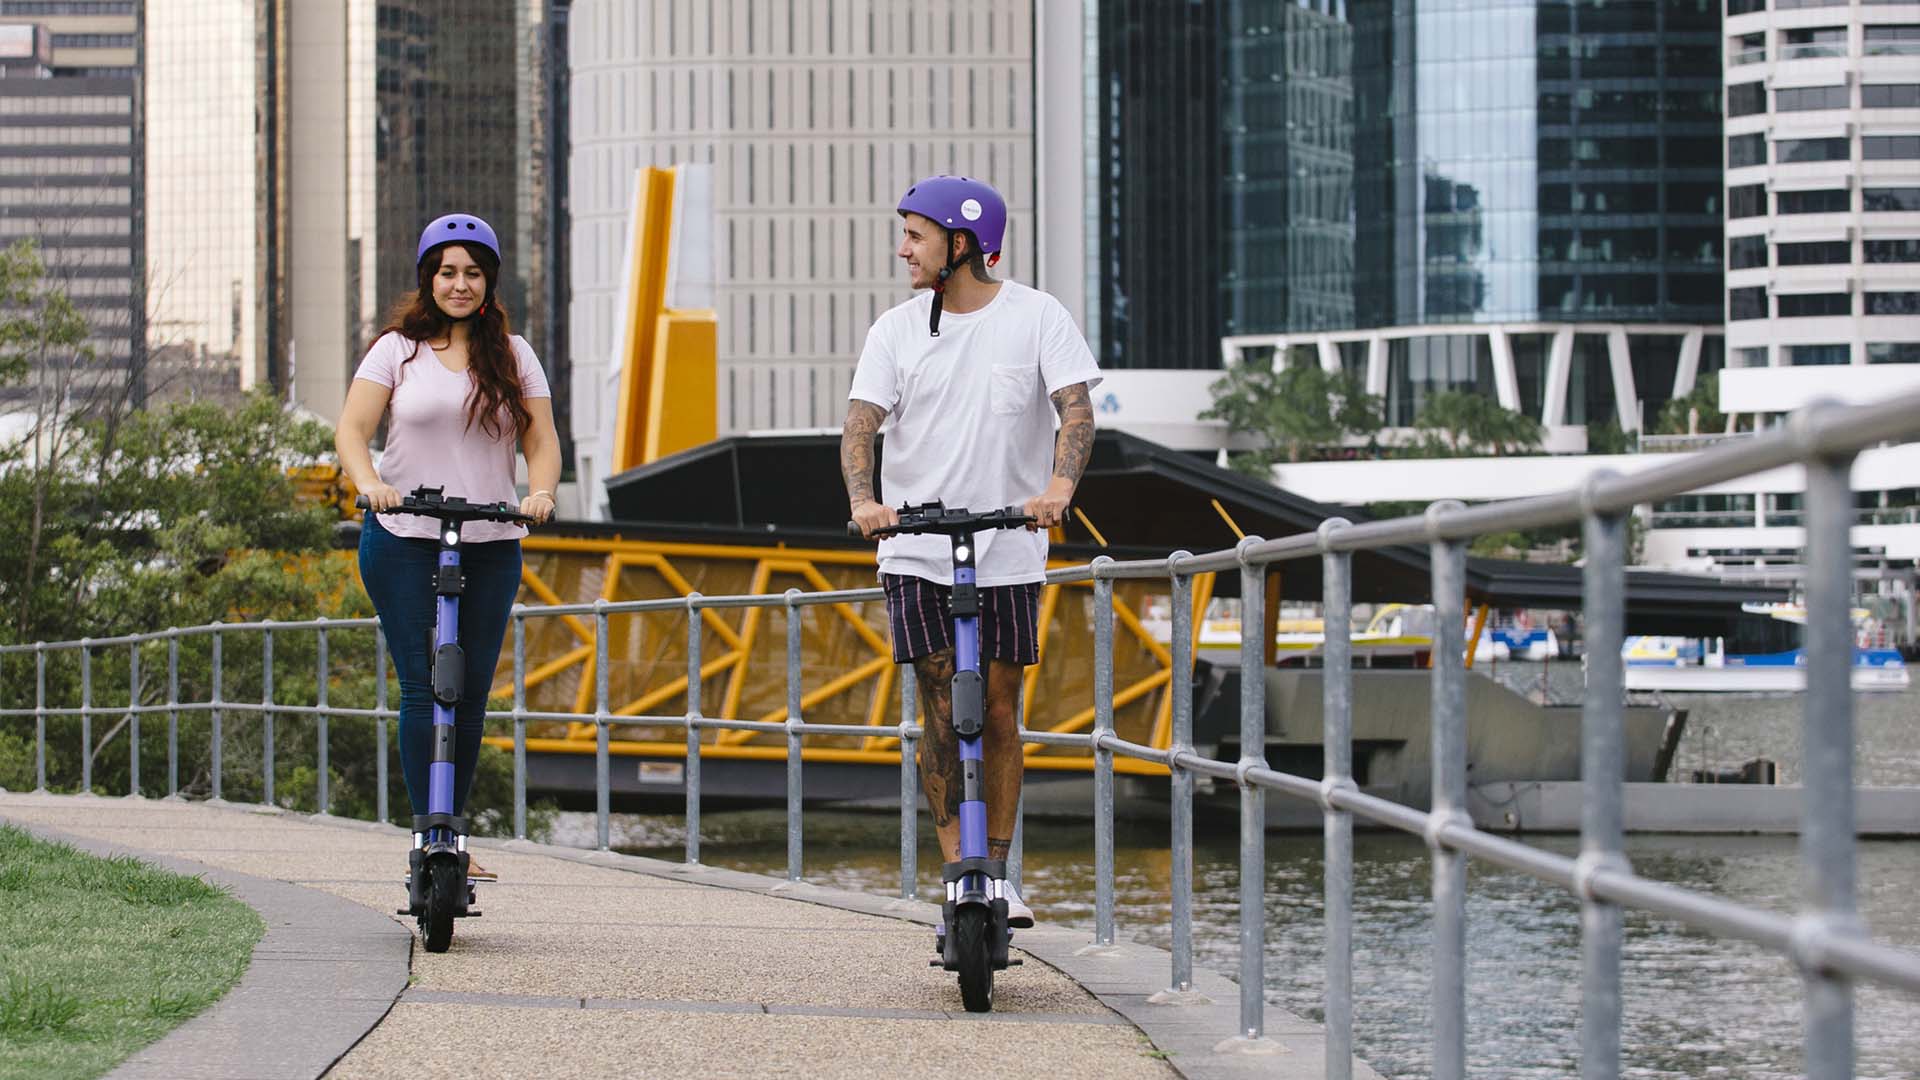 Beam Is Brisbane's New Purple-Hued E-Bike and E-Scooter Service with Designated Parking Spots